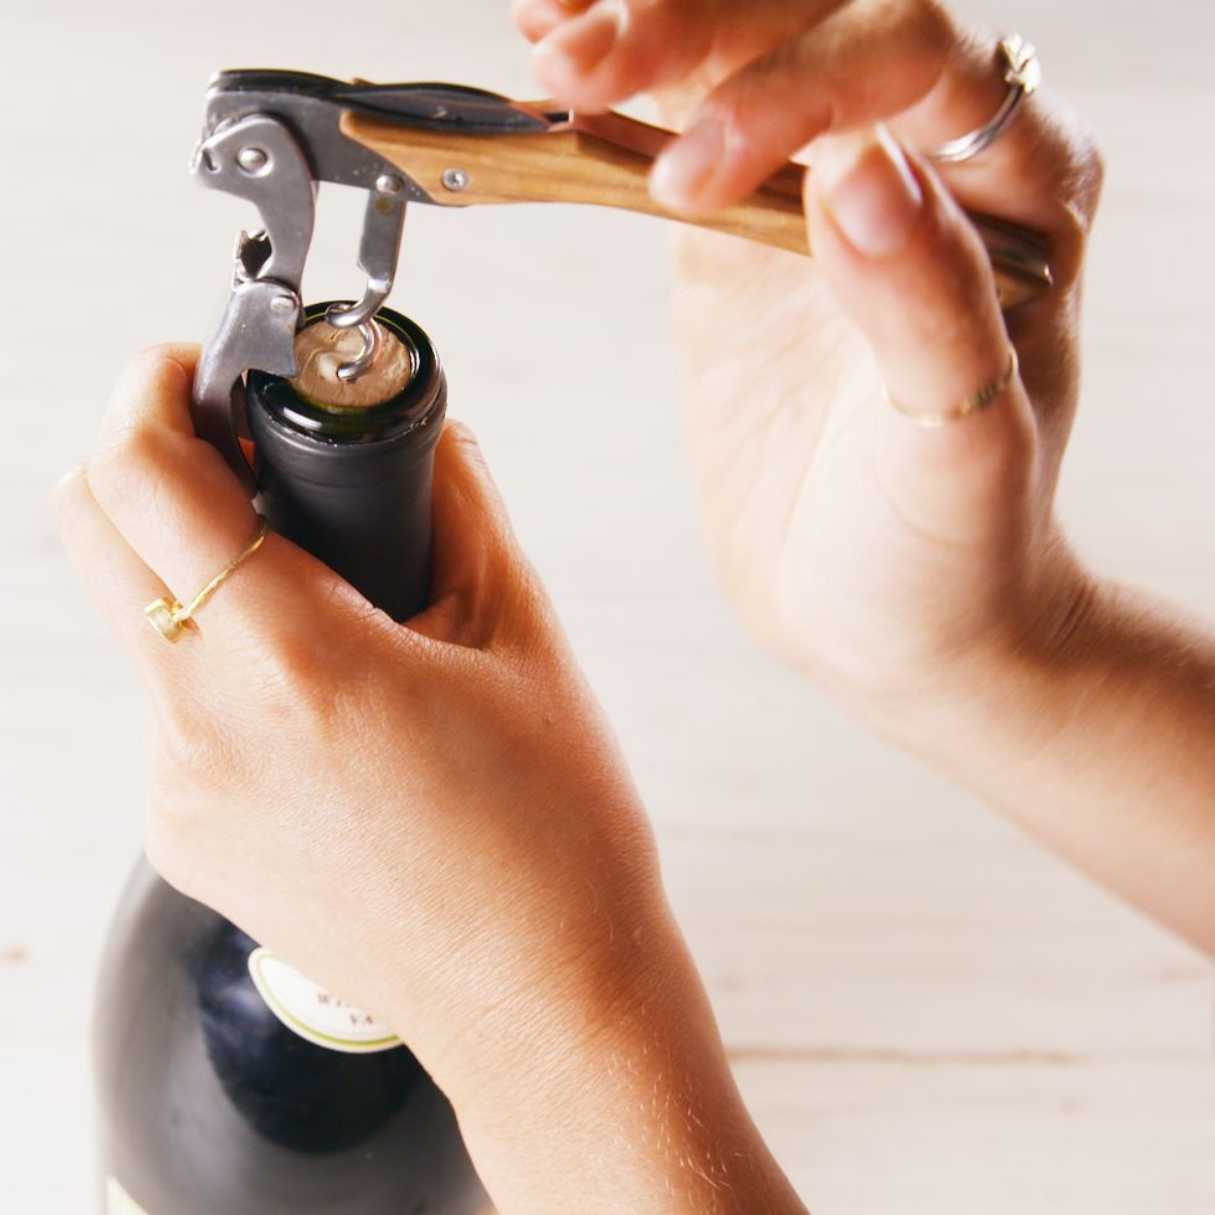 How To Use A Wine Opener With Arms